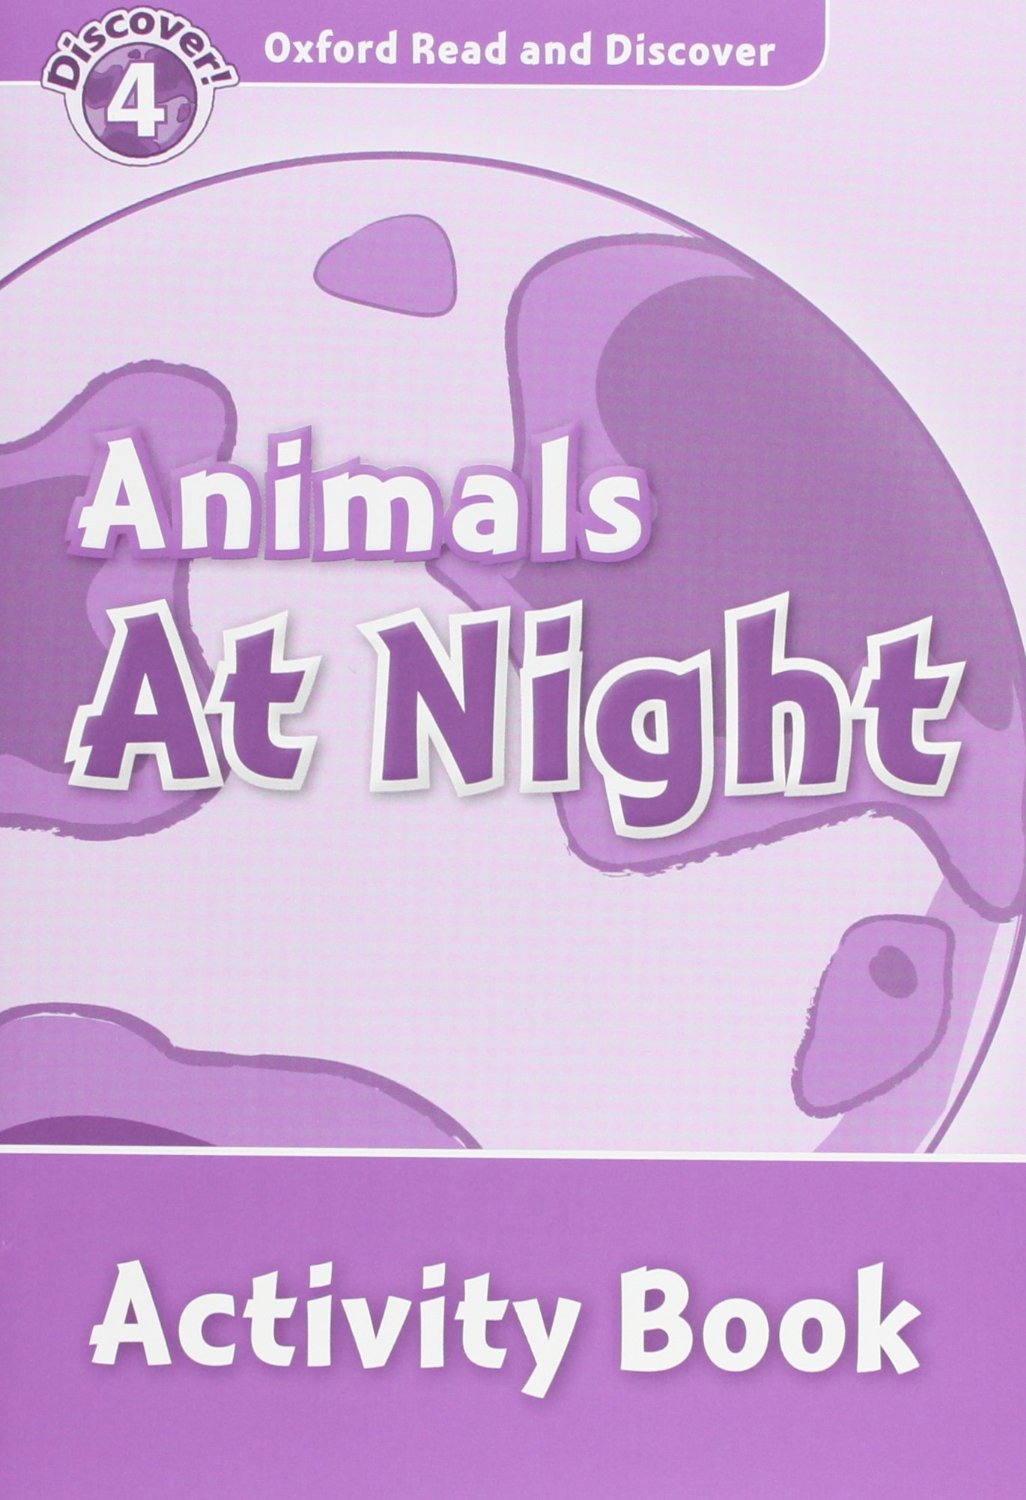 ANIMALS AT NIGHT (OXFORD READ AND DISCOVER, LEVEL 4) Activity Book